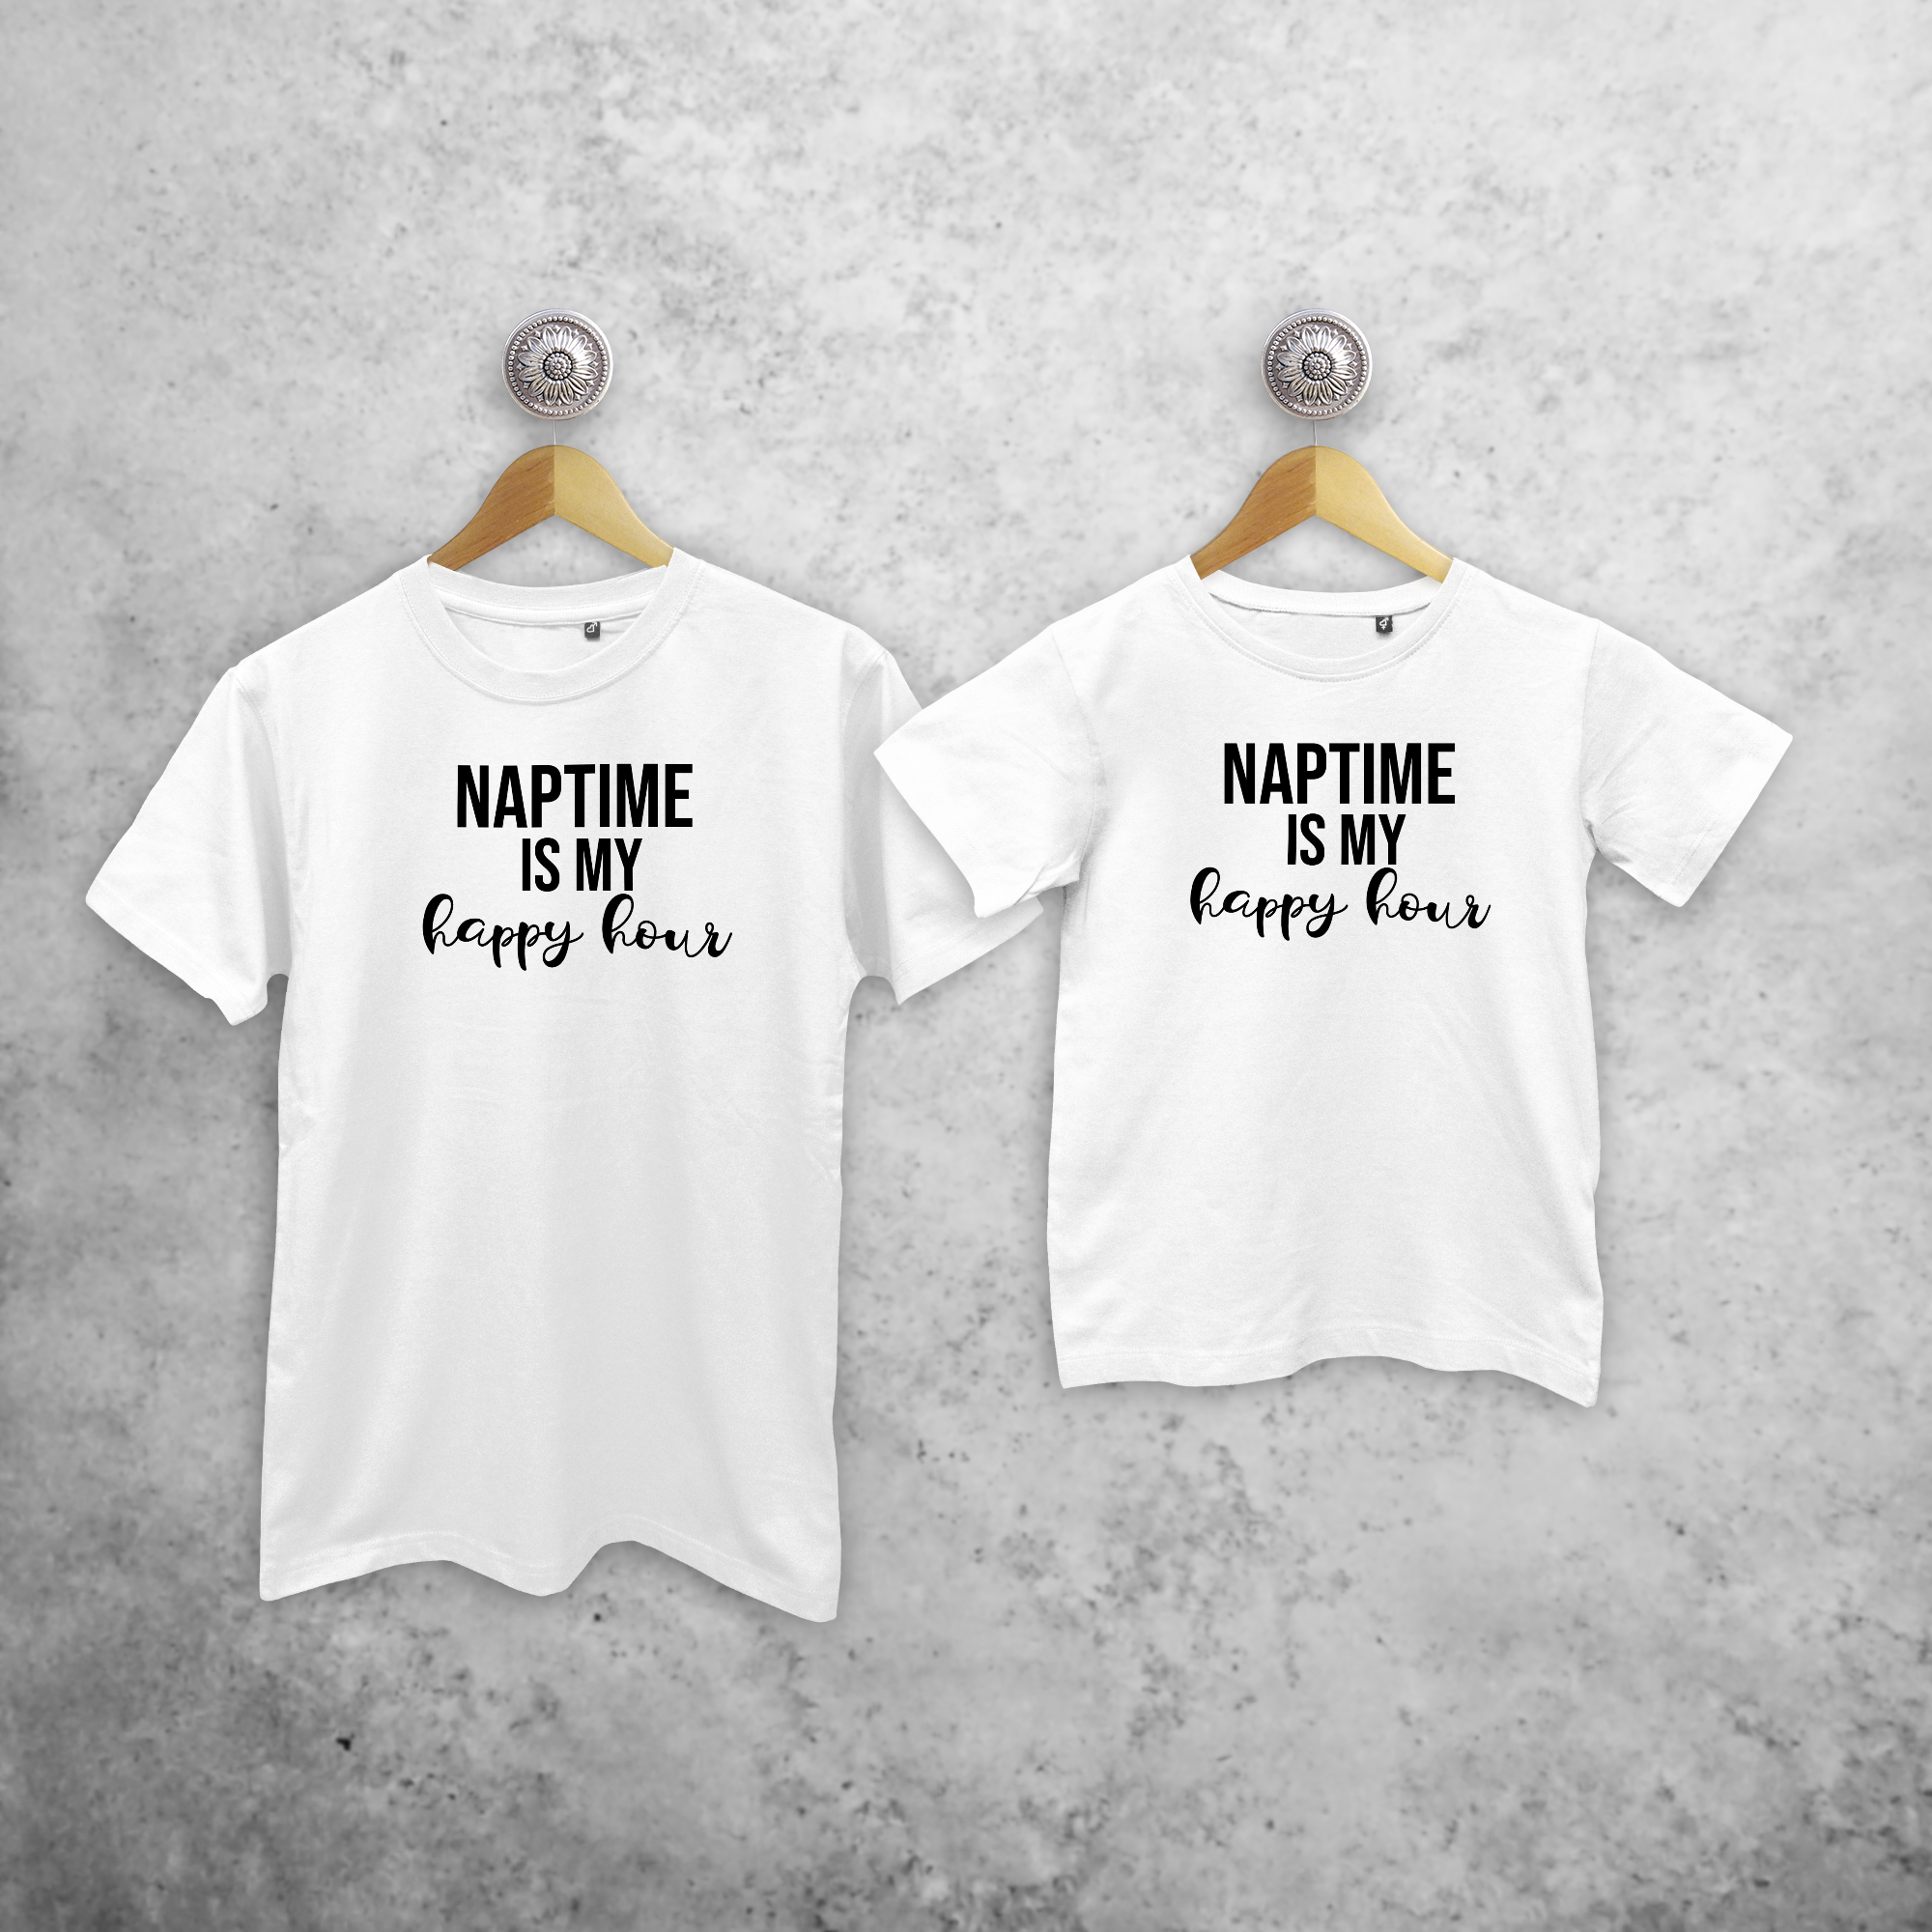 'Naptime is my happy hour' matchende shirts